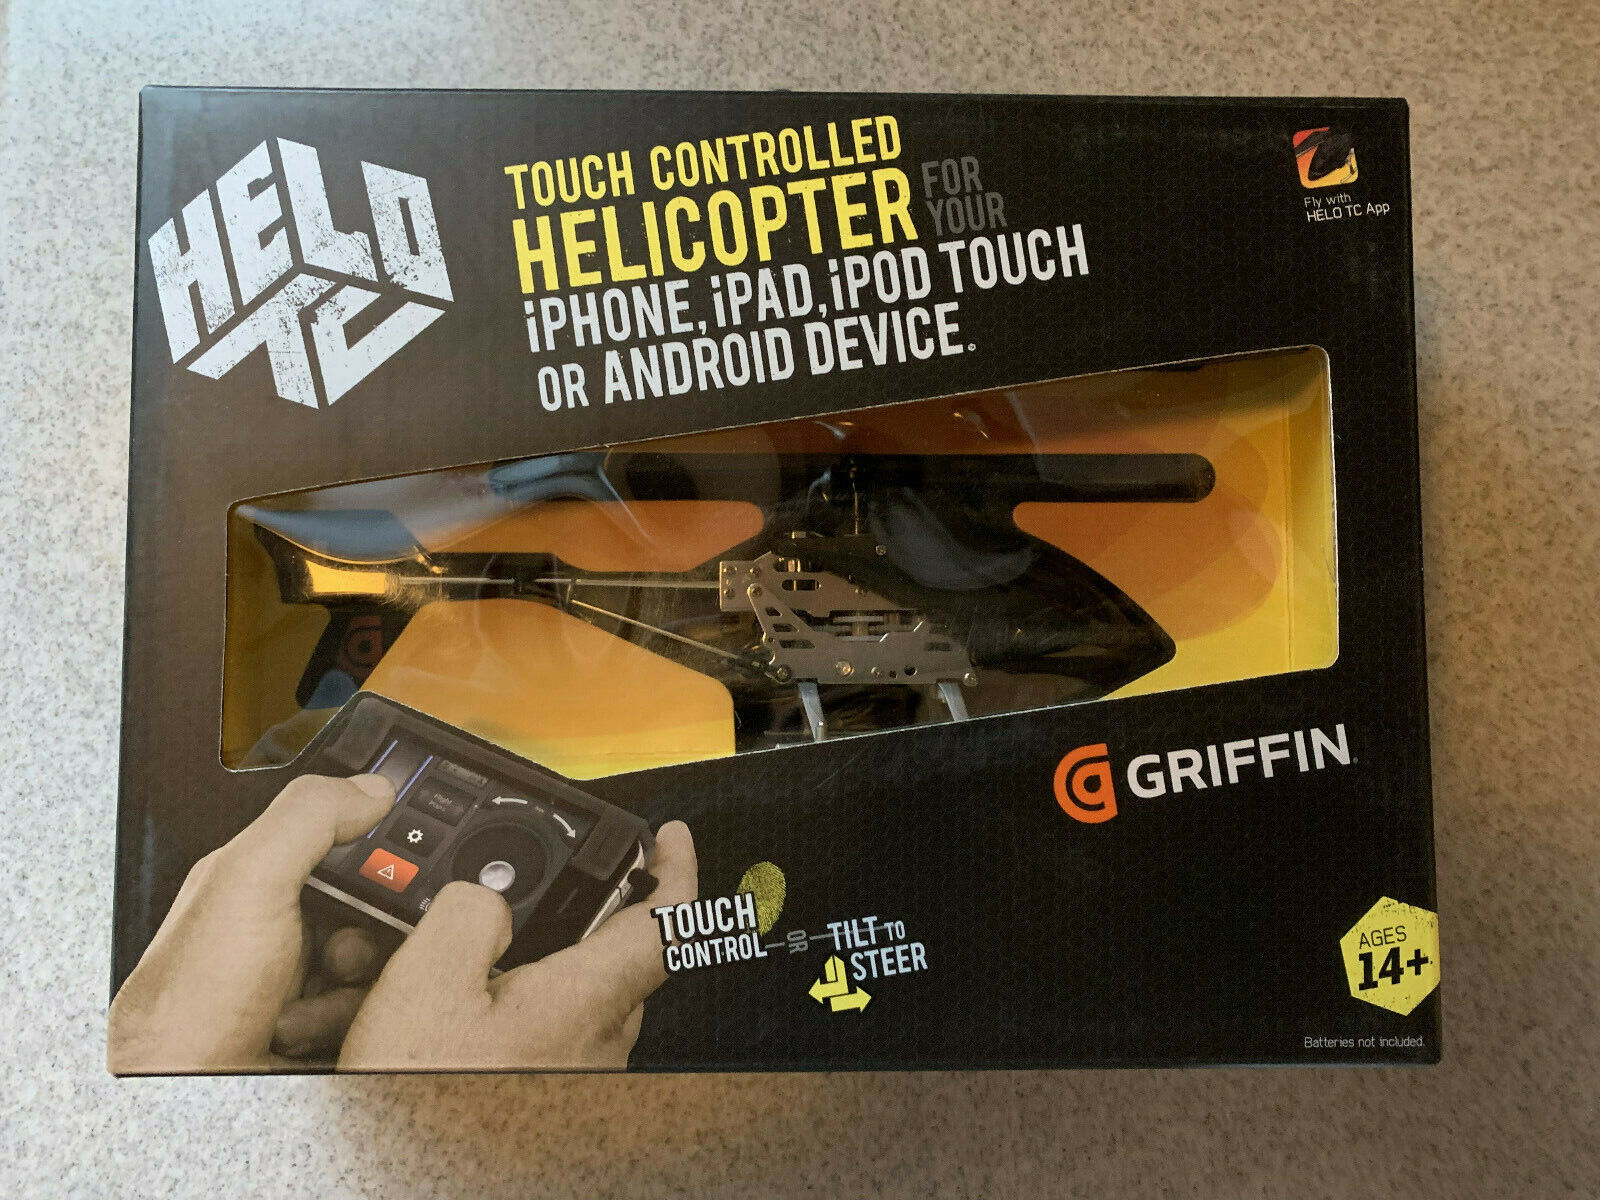 HELO TC Touch Controlled Helicopter for iPhone, iPad,iPod touch Android GC30021 